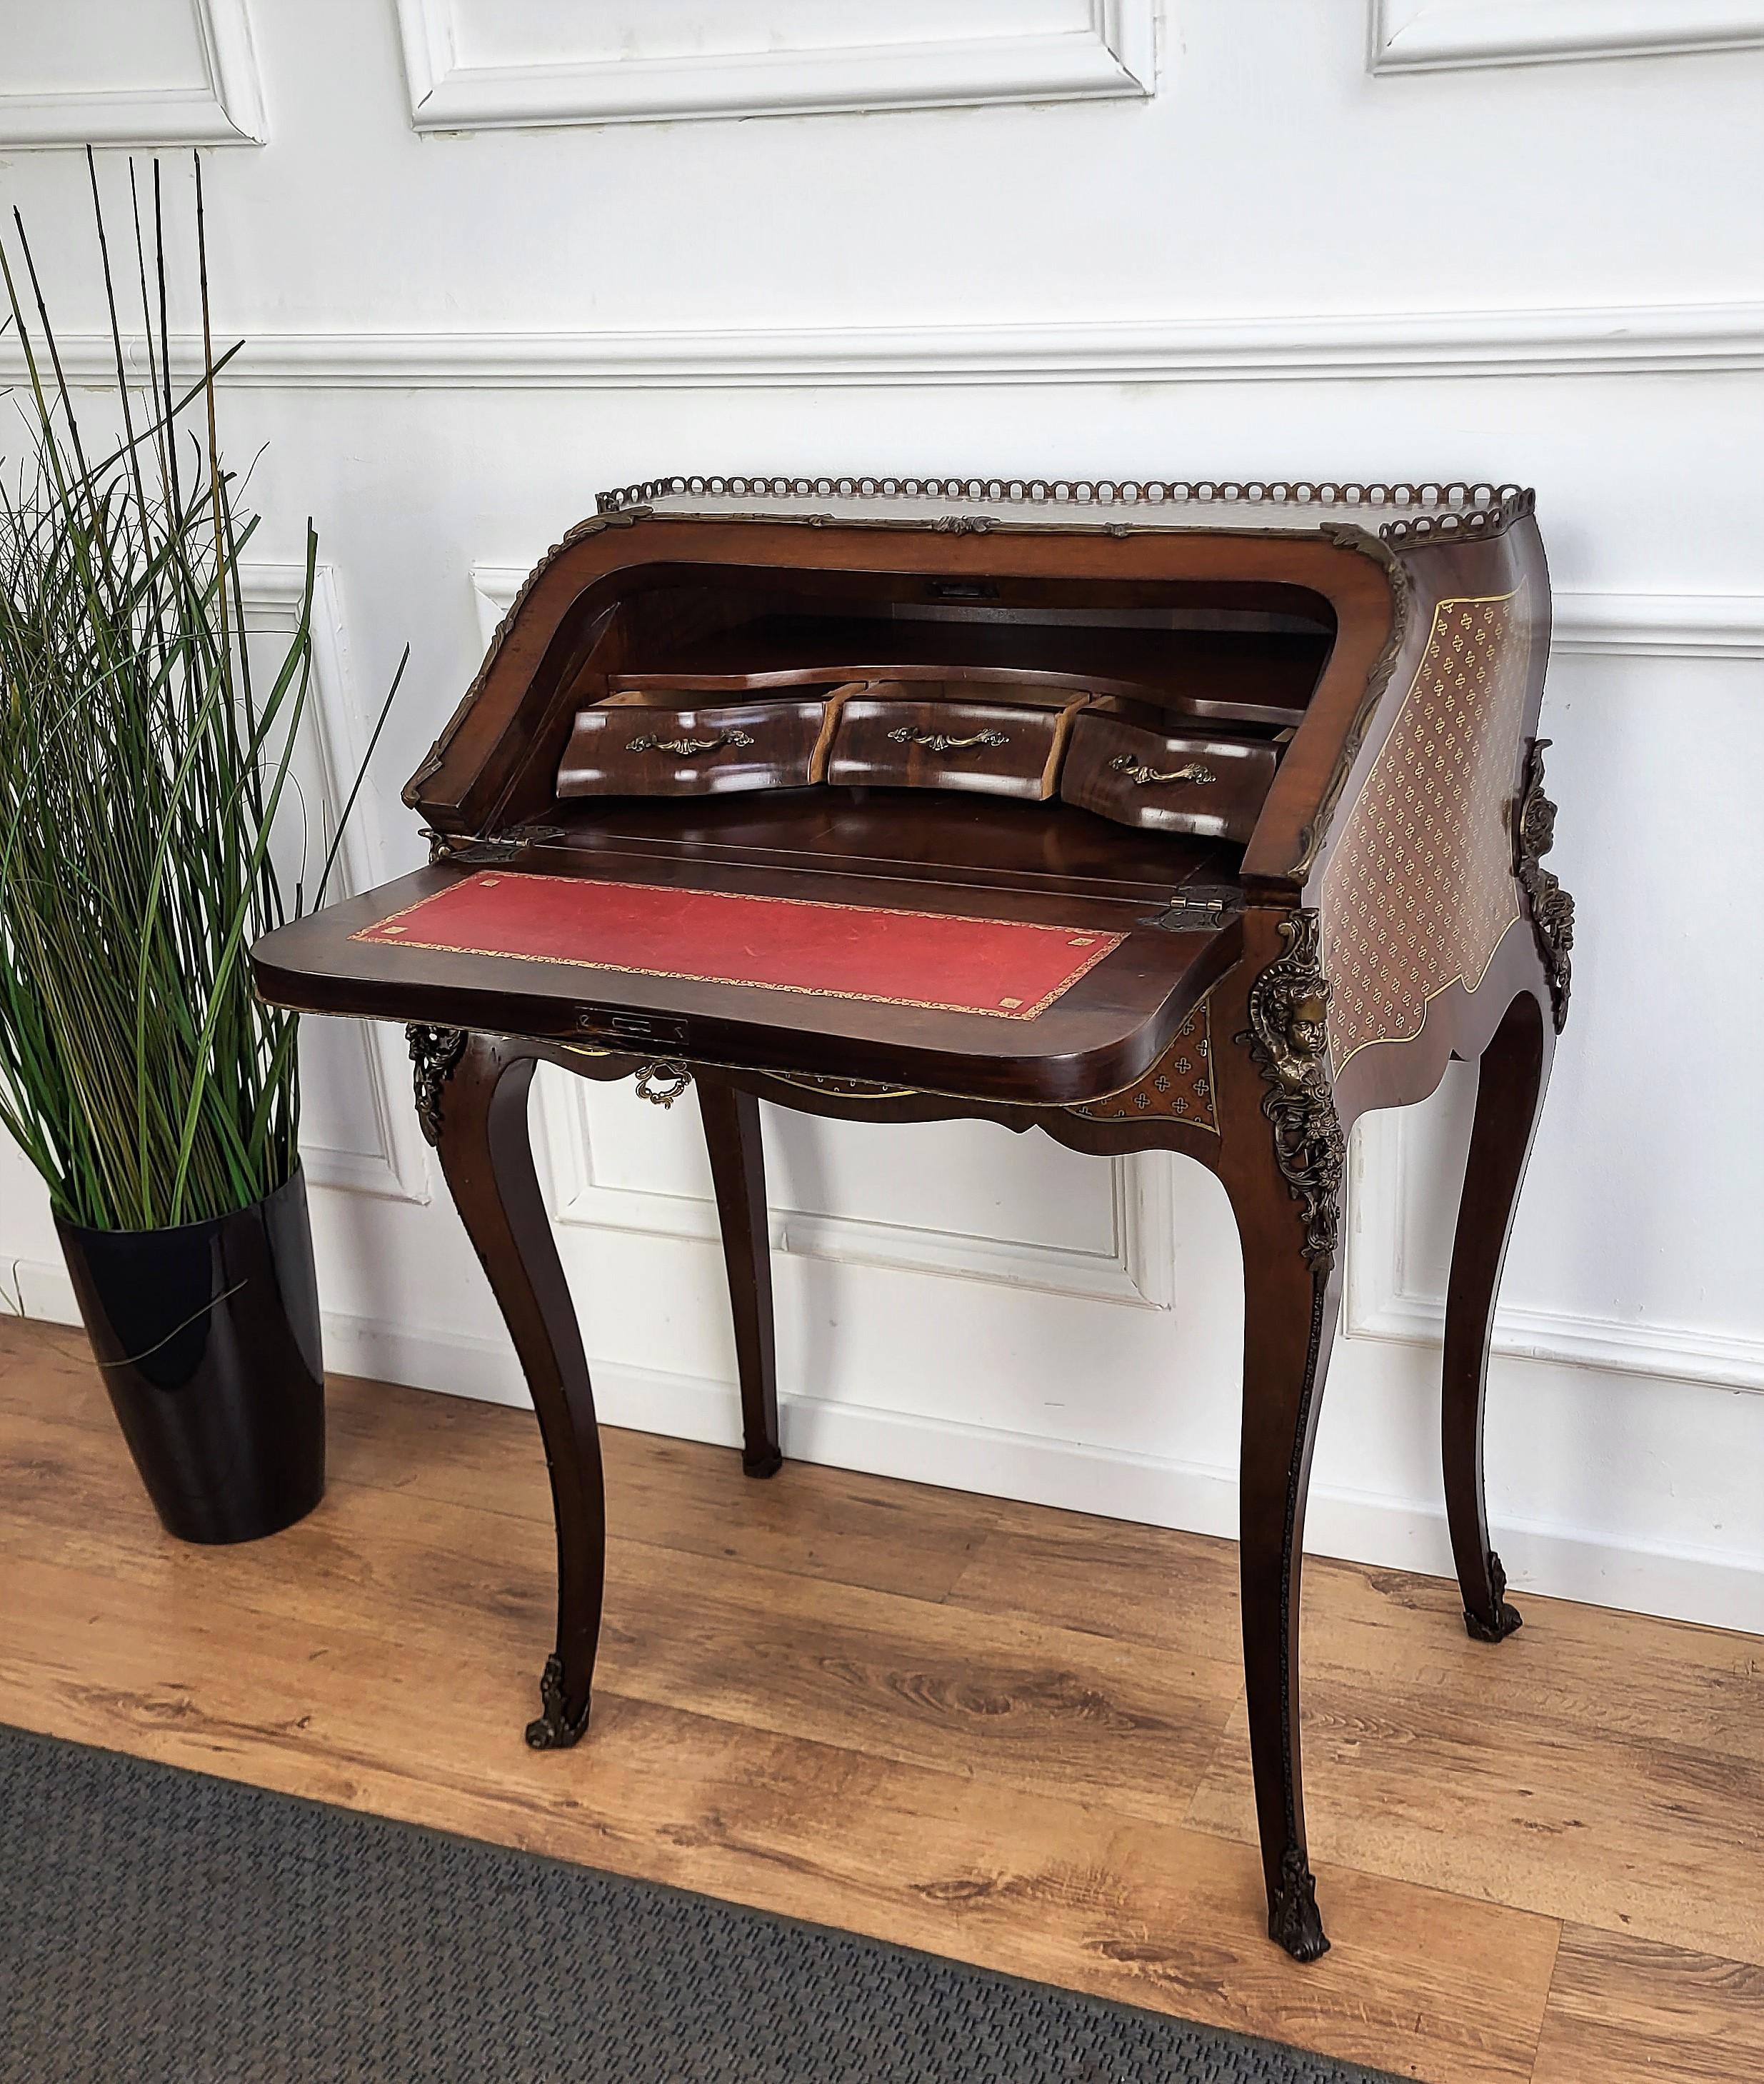 Very elegant Italian desk, writing table, with slant drop front, with the beautiful light and dark wood inlay decors in classic figures all around the piece and the amazing bronze sculptures on the legs. When opened we find the writing area in red